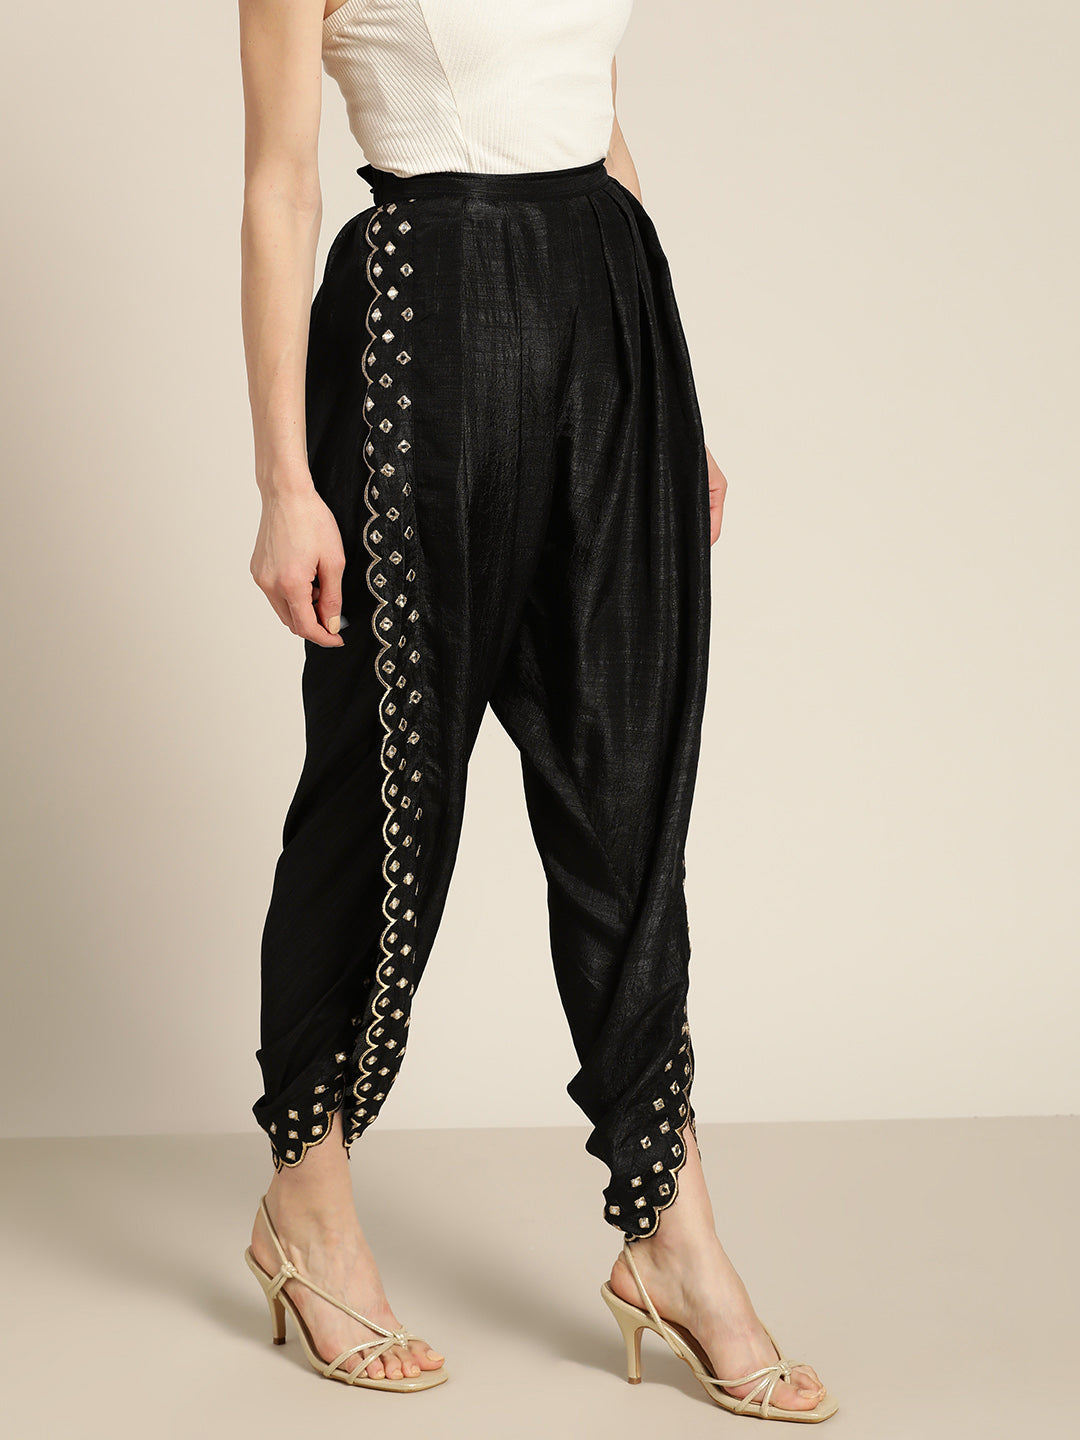 EMBROIDERED BLACK INDO WESTERN DHOTI PANT